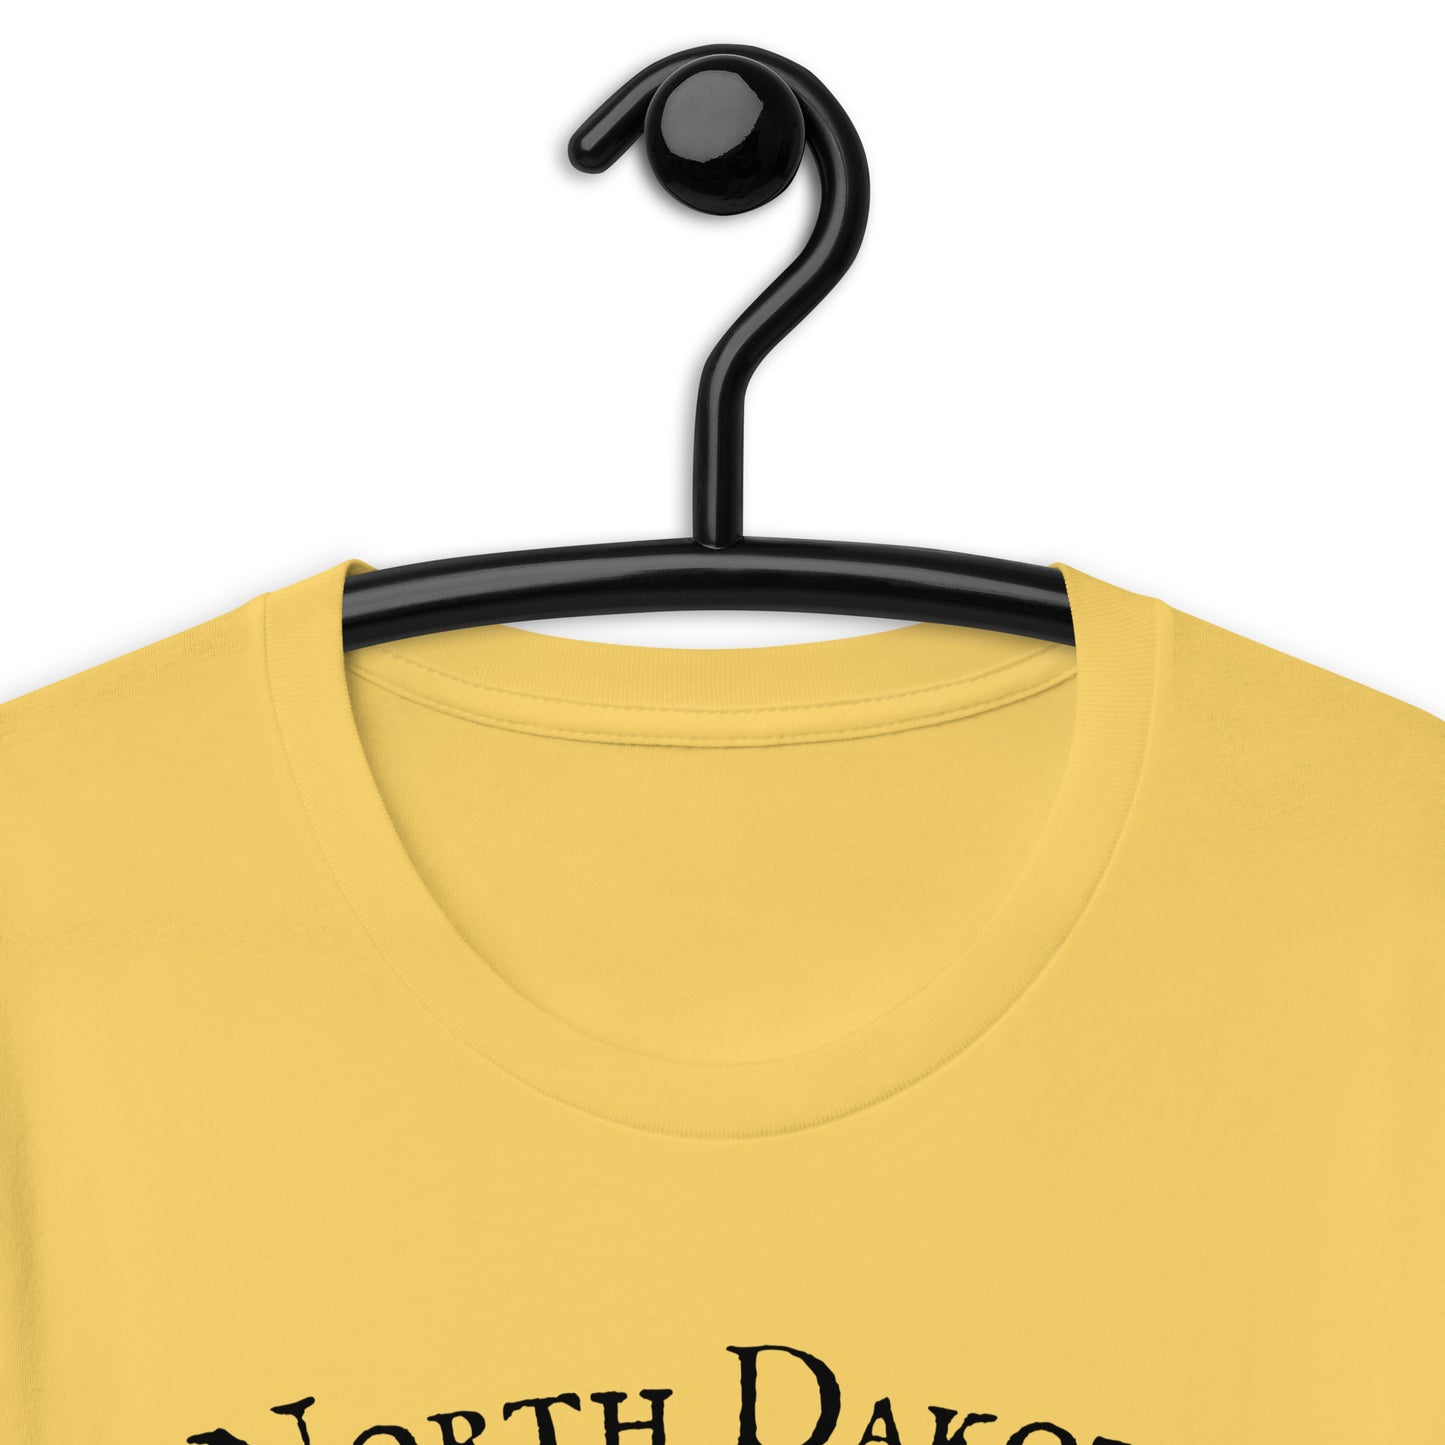 "North Dakota Established In 1889" T-Shirt - Weave Got Gifts - Unique Gifts You Won’t Find Anywhere Else!